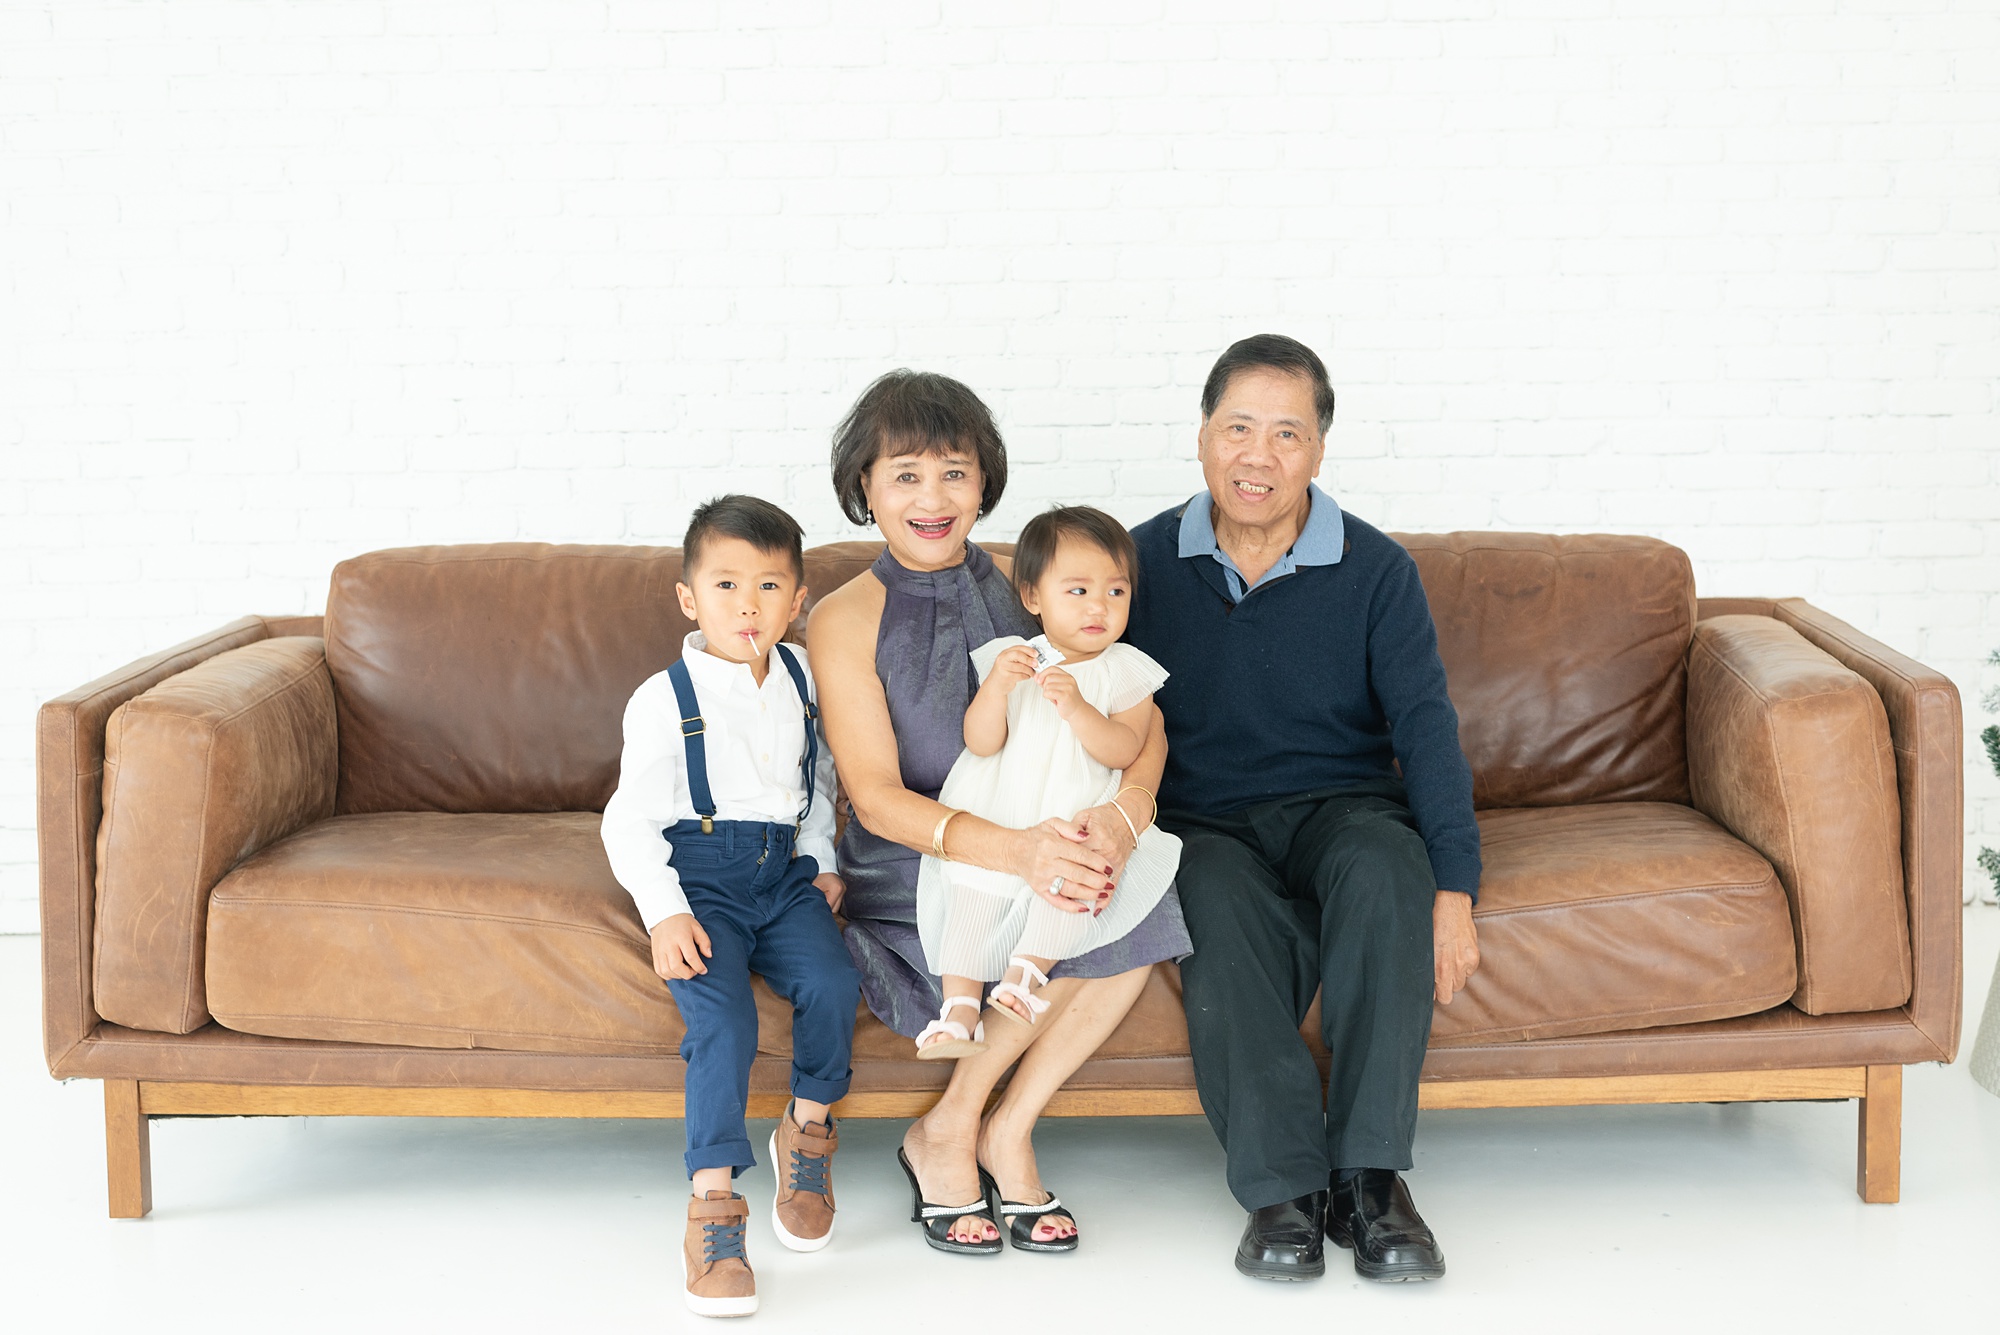 grandparents sit with grandchildren on couch in the Lumen Room